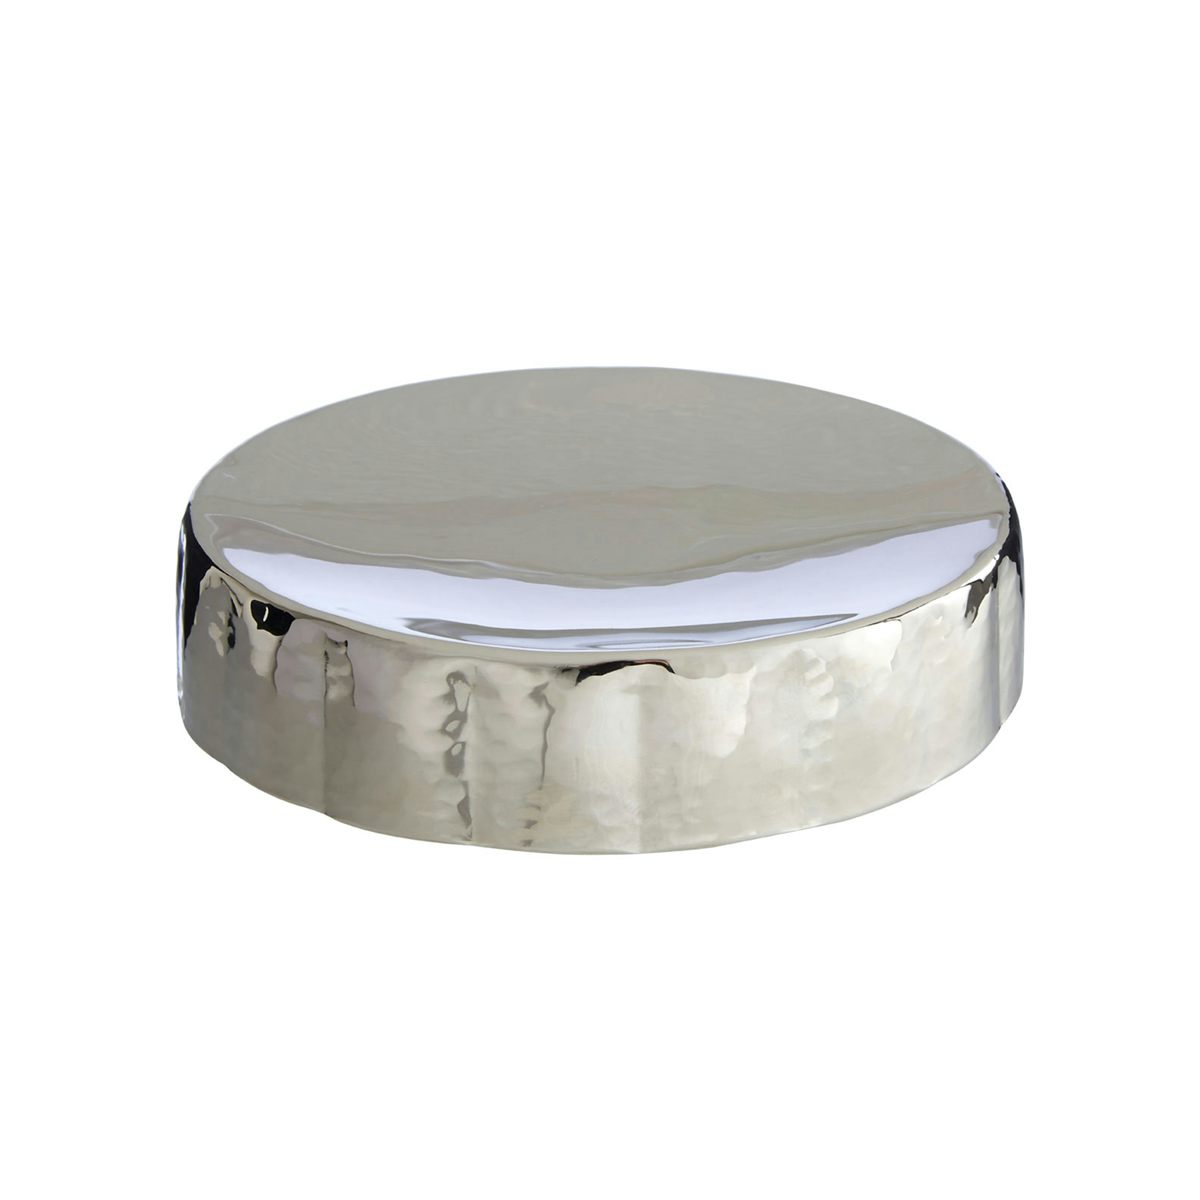 Accents Hammered nickel effect soap dish